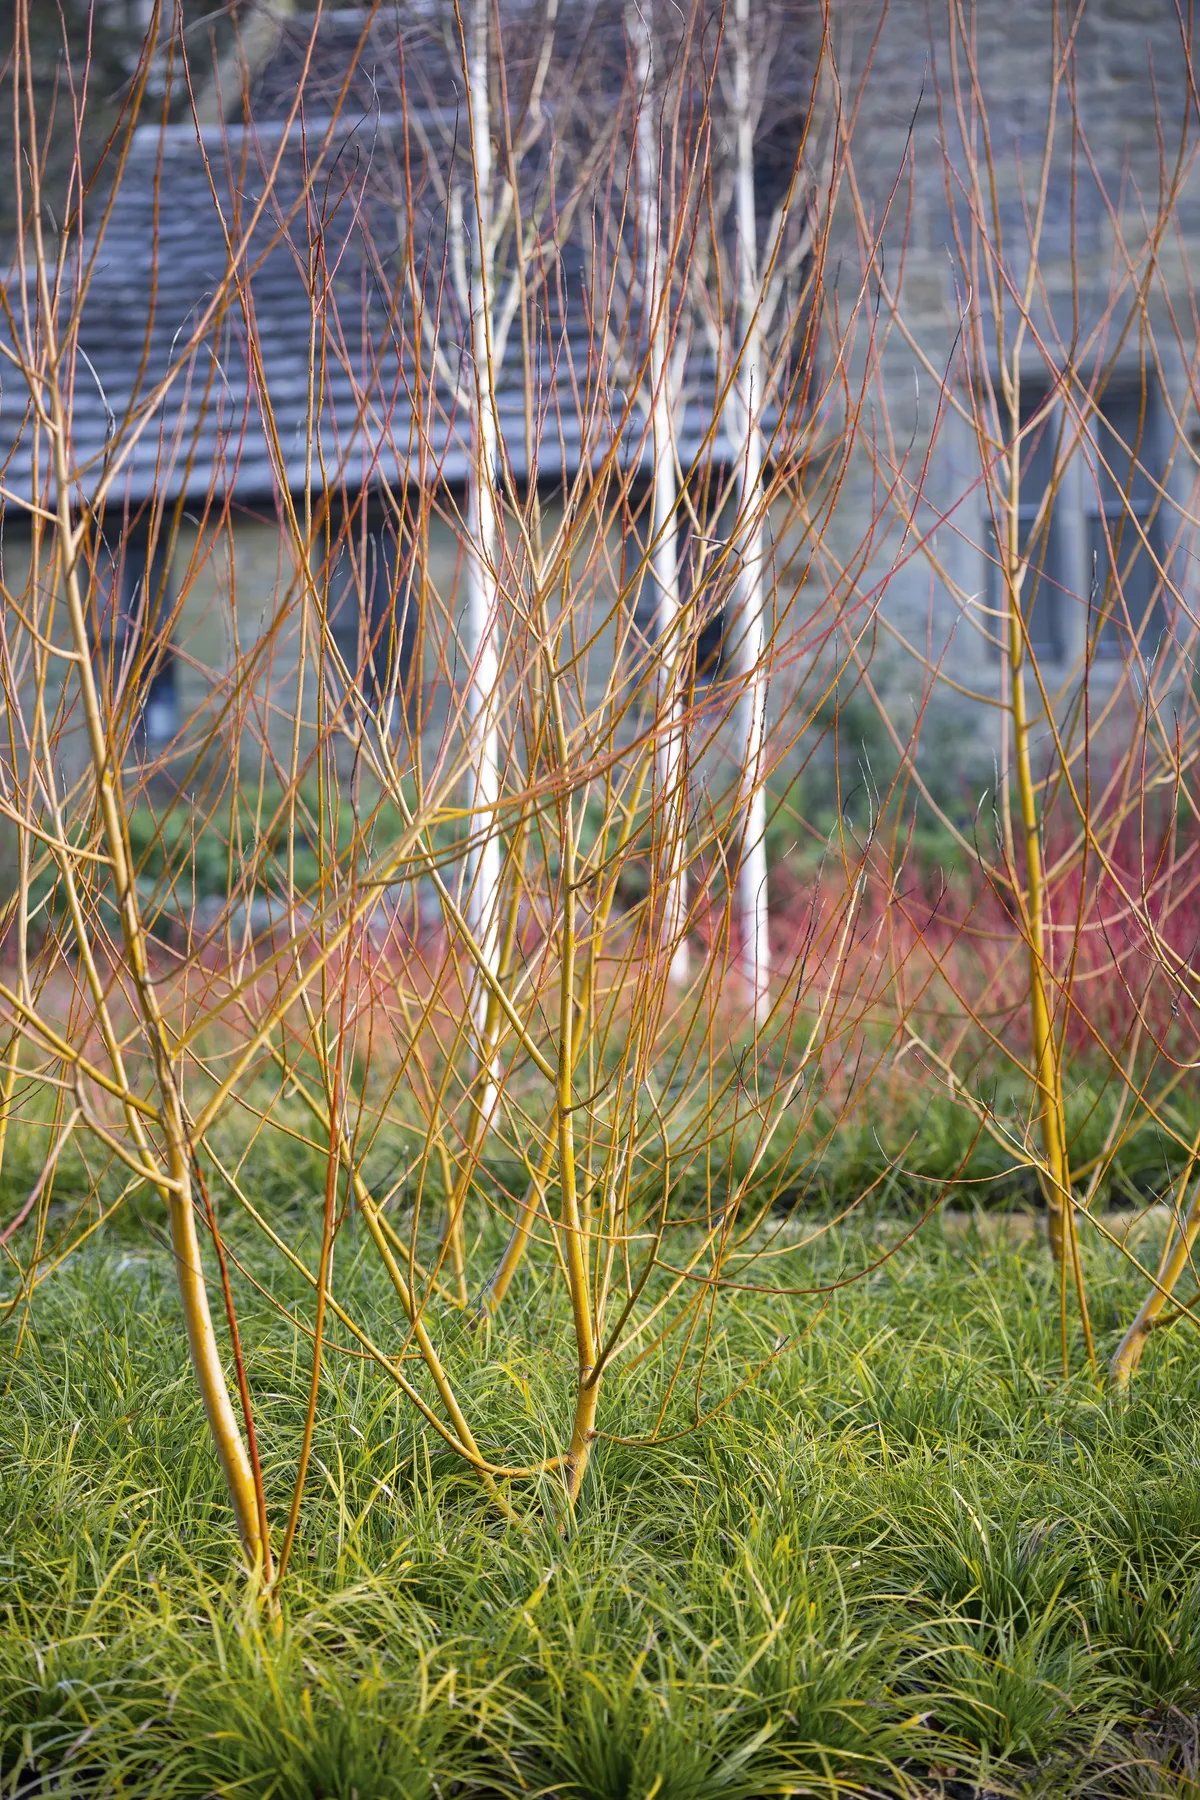 Salix alba ‘Hutchinson’s Yellow Bark’ A deciduous tree often coppiced or stooled to promote young growth. After leaf fall, new stems glow an intense yellow. 10m x 5m. RHS H6.